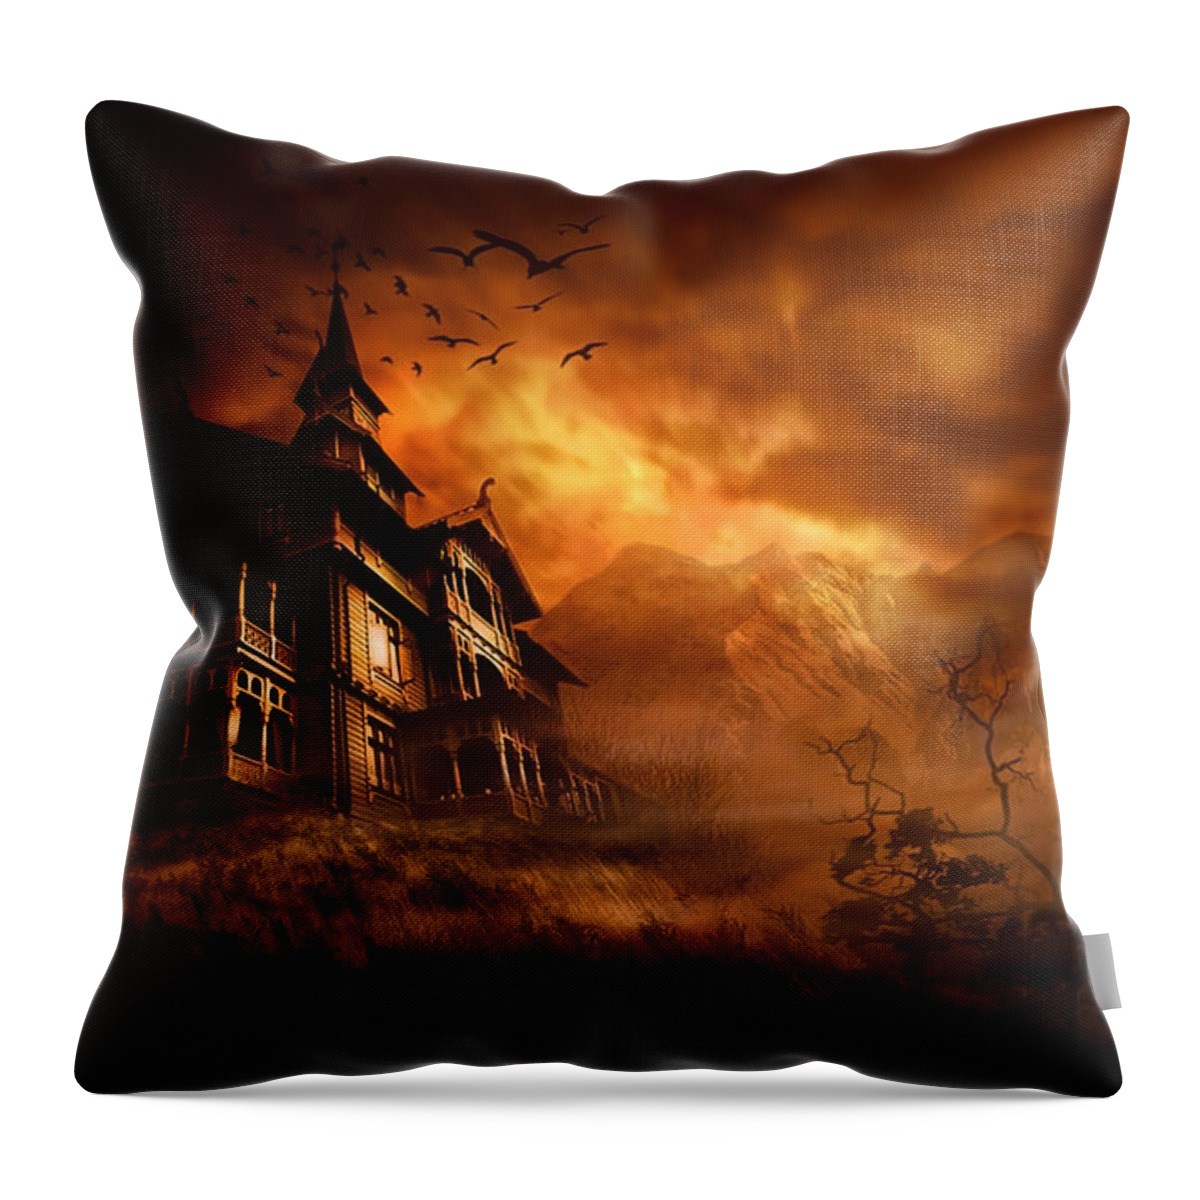 Abandoned Throw Pillow featuring the digital art Forbidden Mansion by Svetlana Sewell